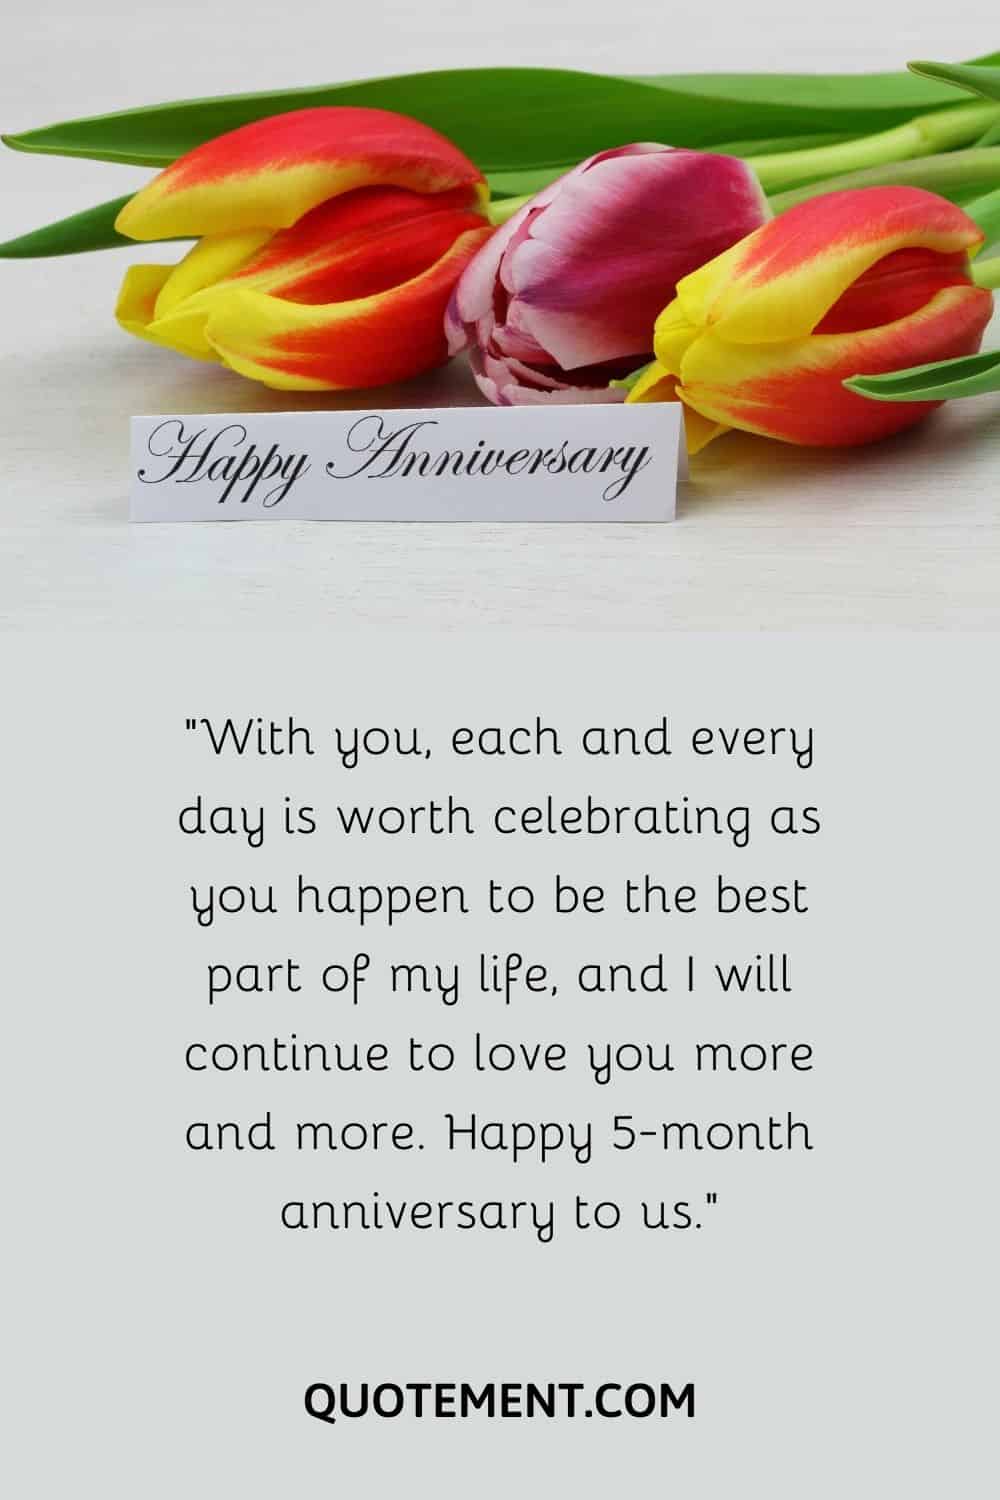 “With you, each and every day is worth celebrating as you happen to be the best part of my life